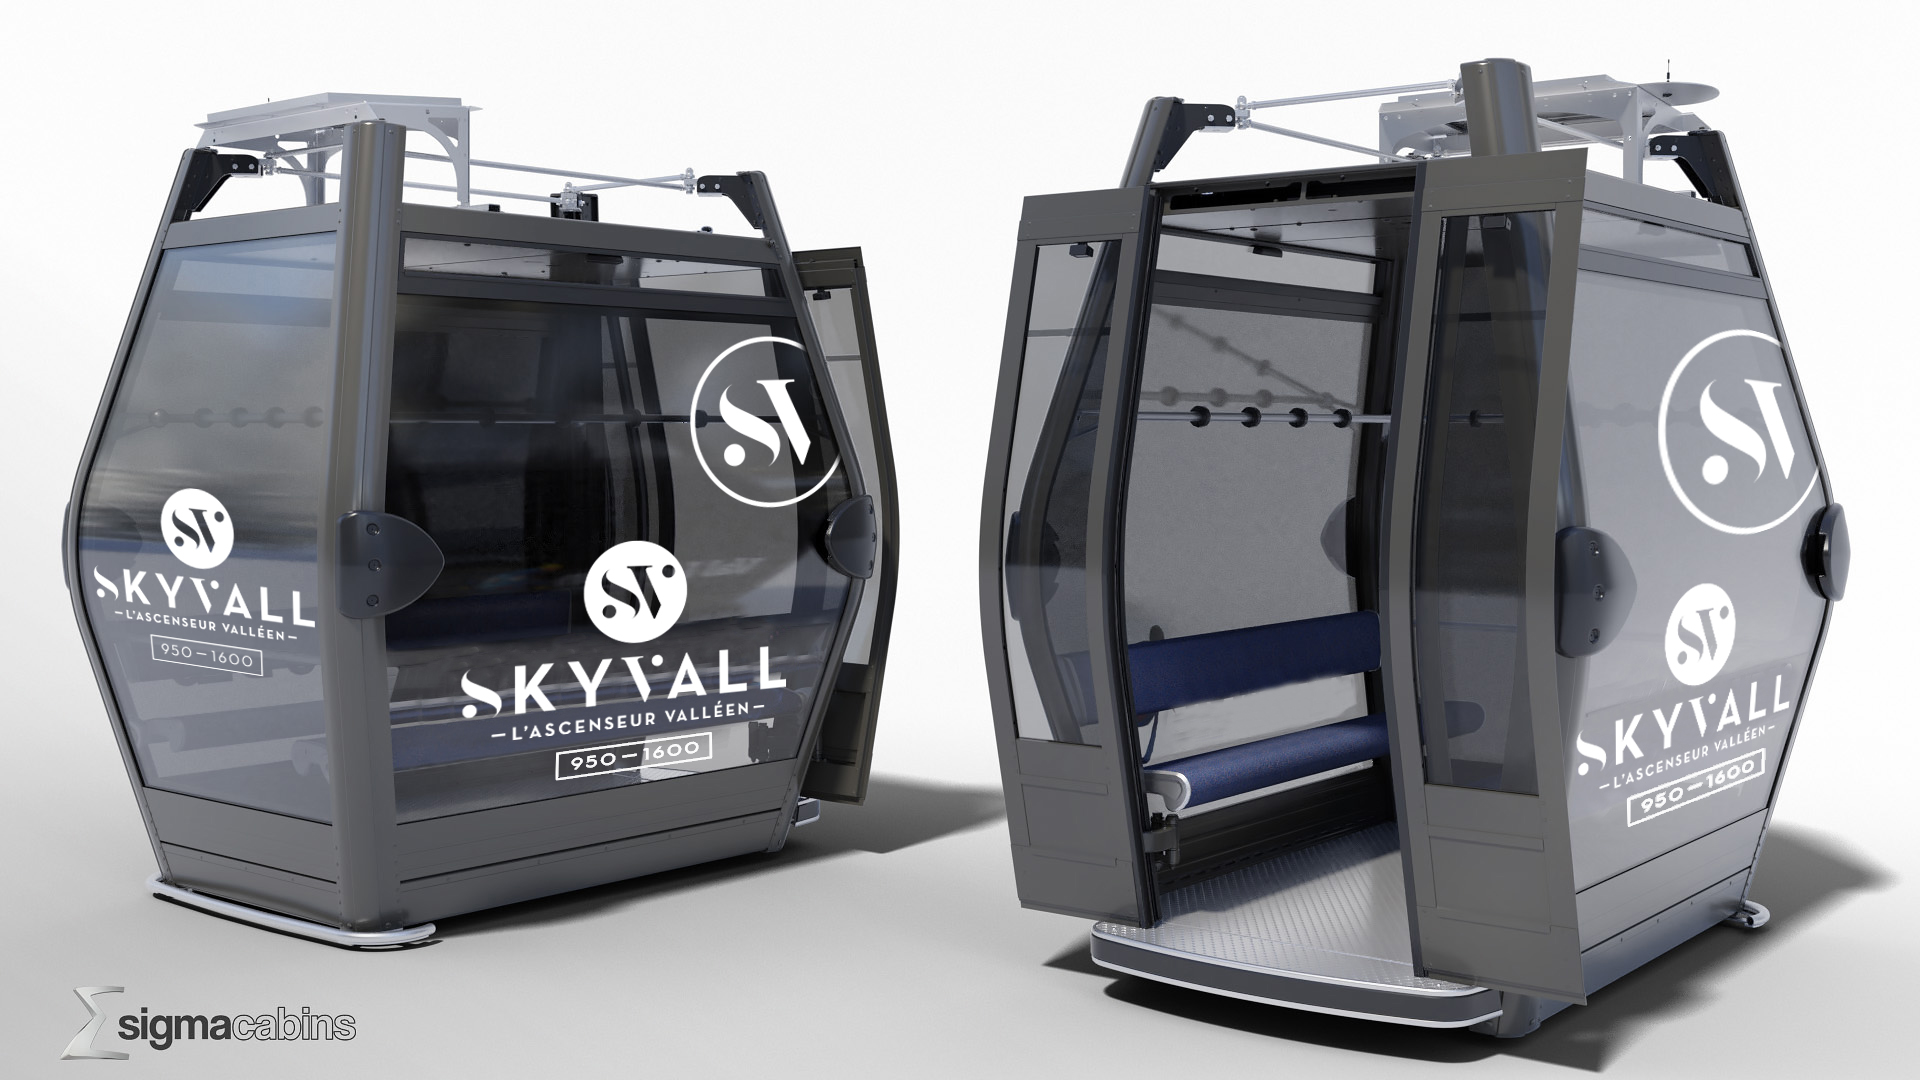 Skyvall Cabines